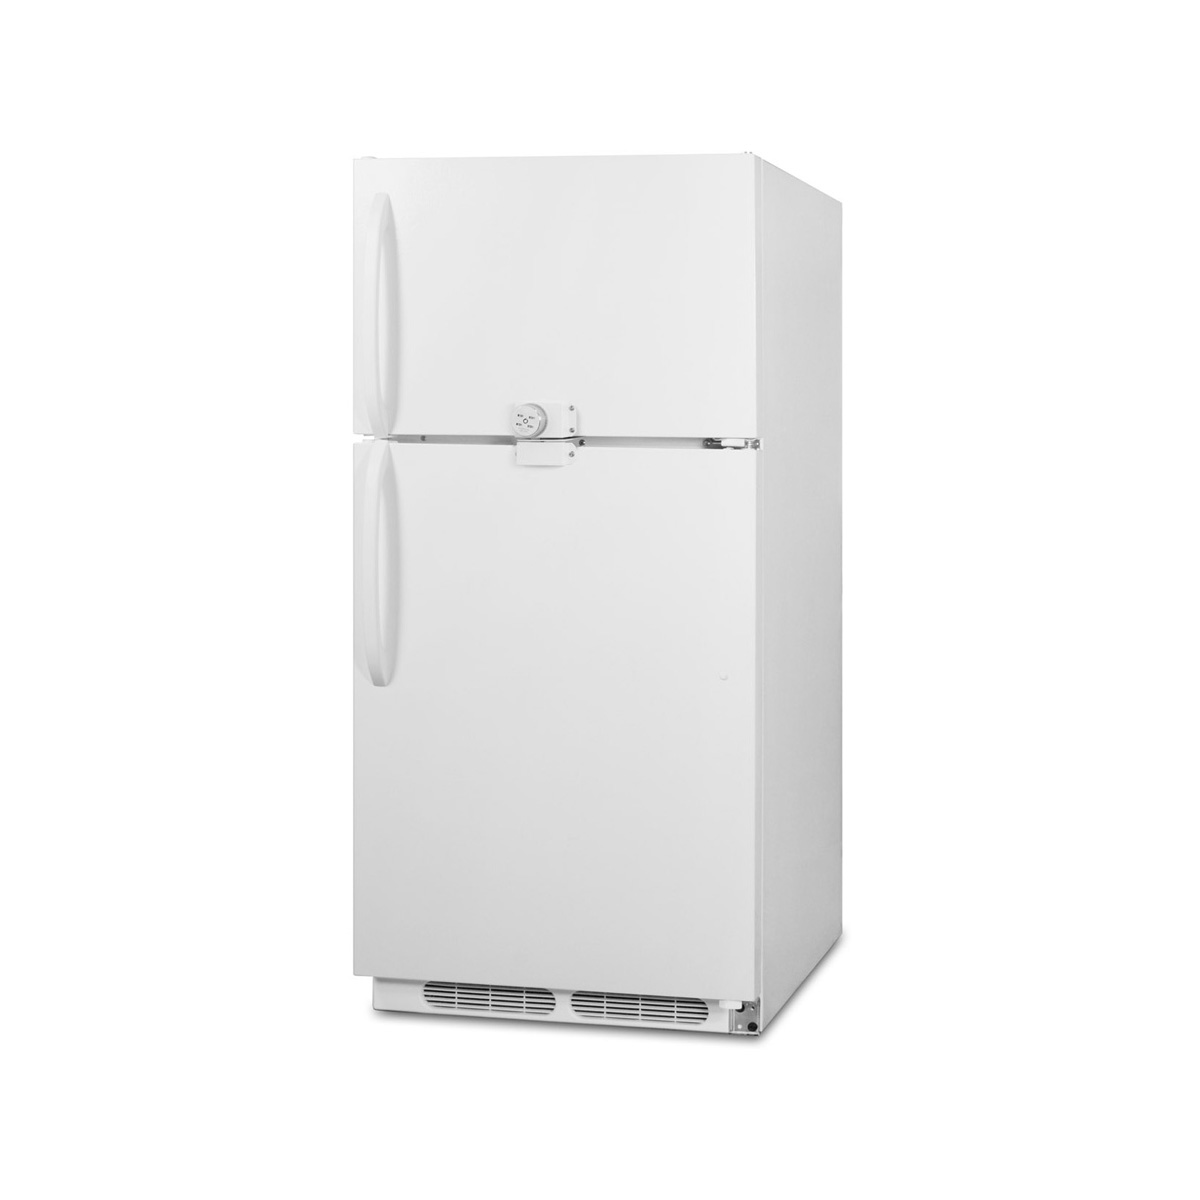 Summit CTR18LLF2 One Section Reach-In Refrigerator Freezer, 18.2 cu. ft.